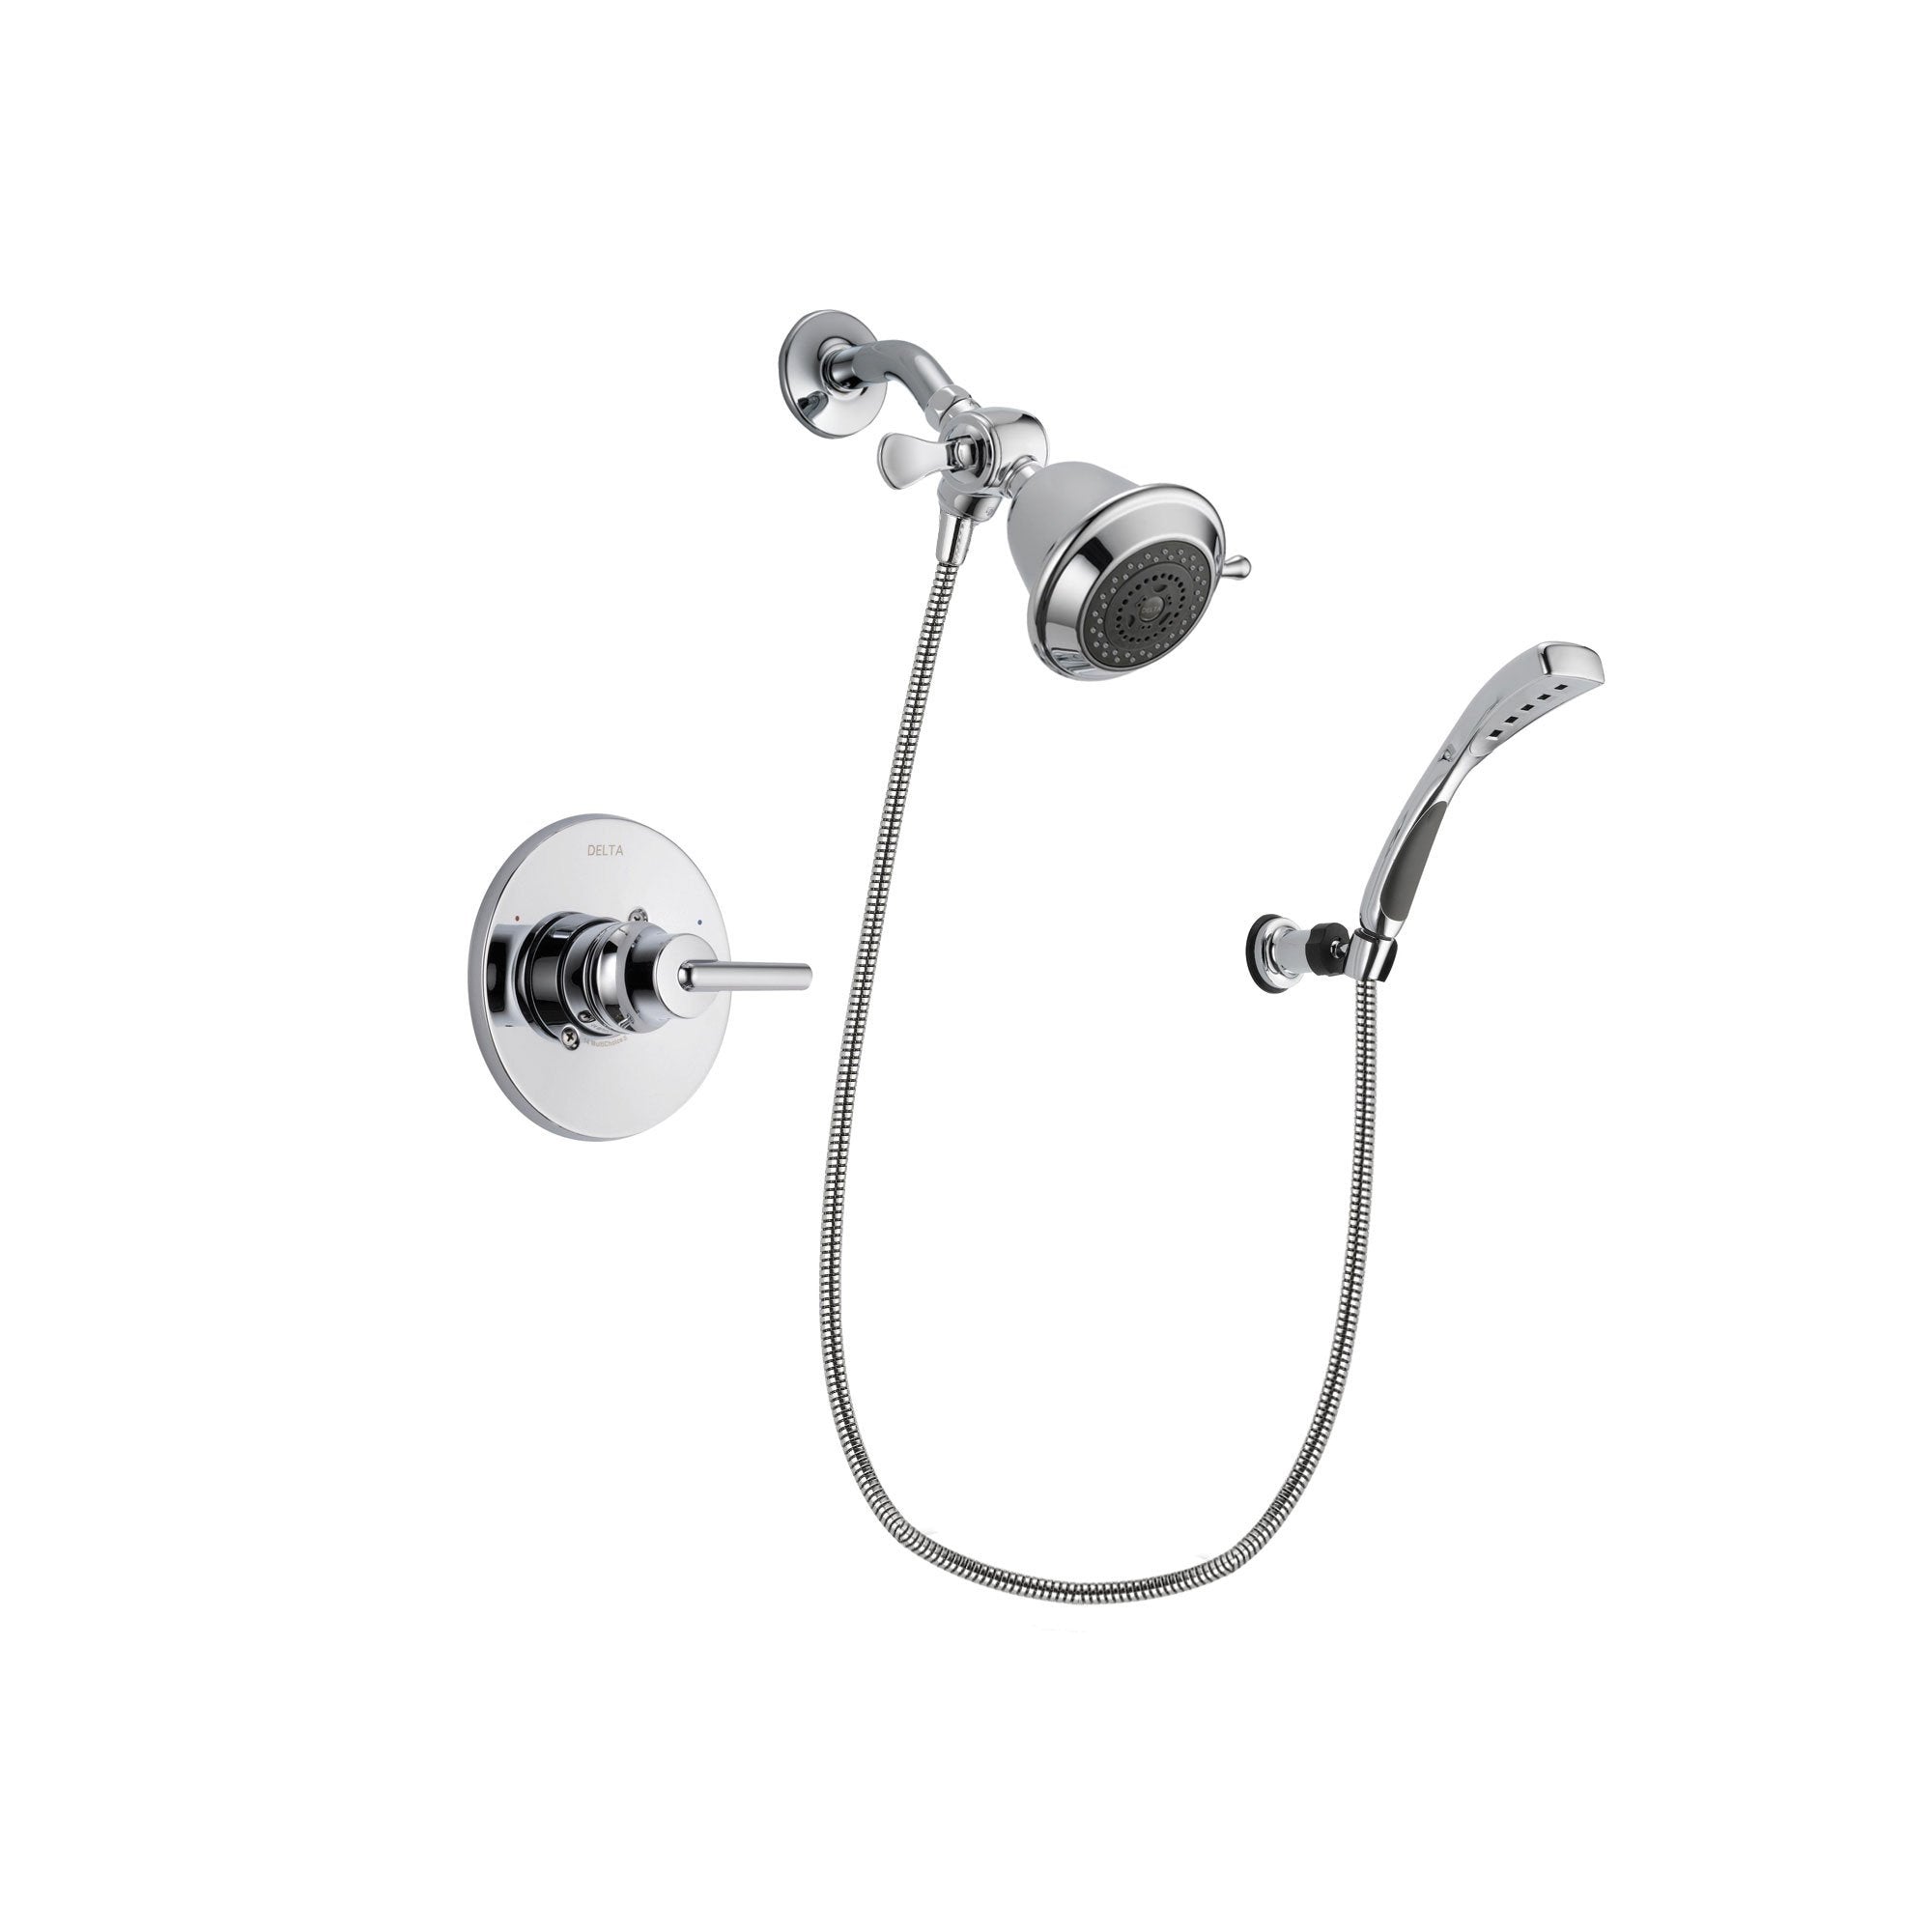 Delta Trinsic Chrome Finish Shower Faucet System Package with Shower Head and Wall-Mount Bracket with Handheld Shower Spray Includes Rough-in Valve DSP0982V